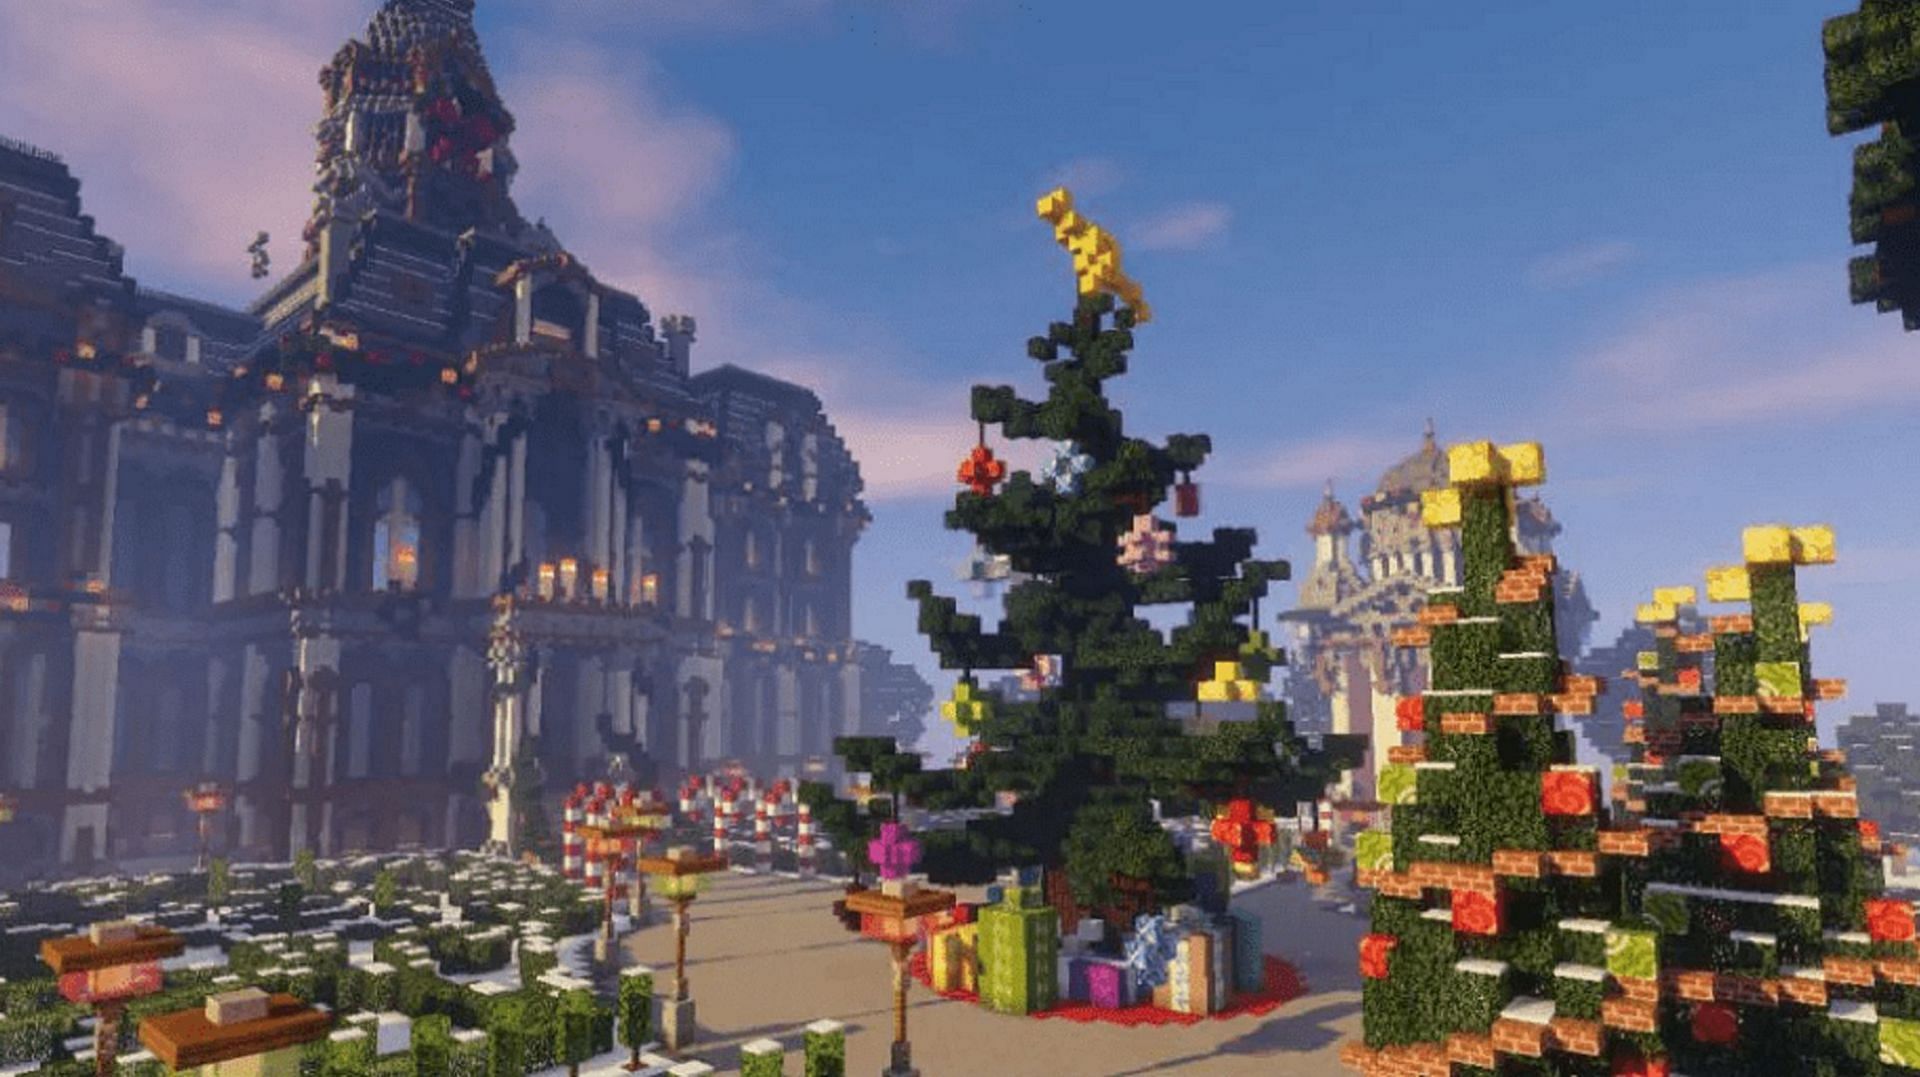 Christmas is quickly approaching, and Minecraft players are taking advantage (Image via GeminiTay/Minecraft.net)